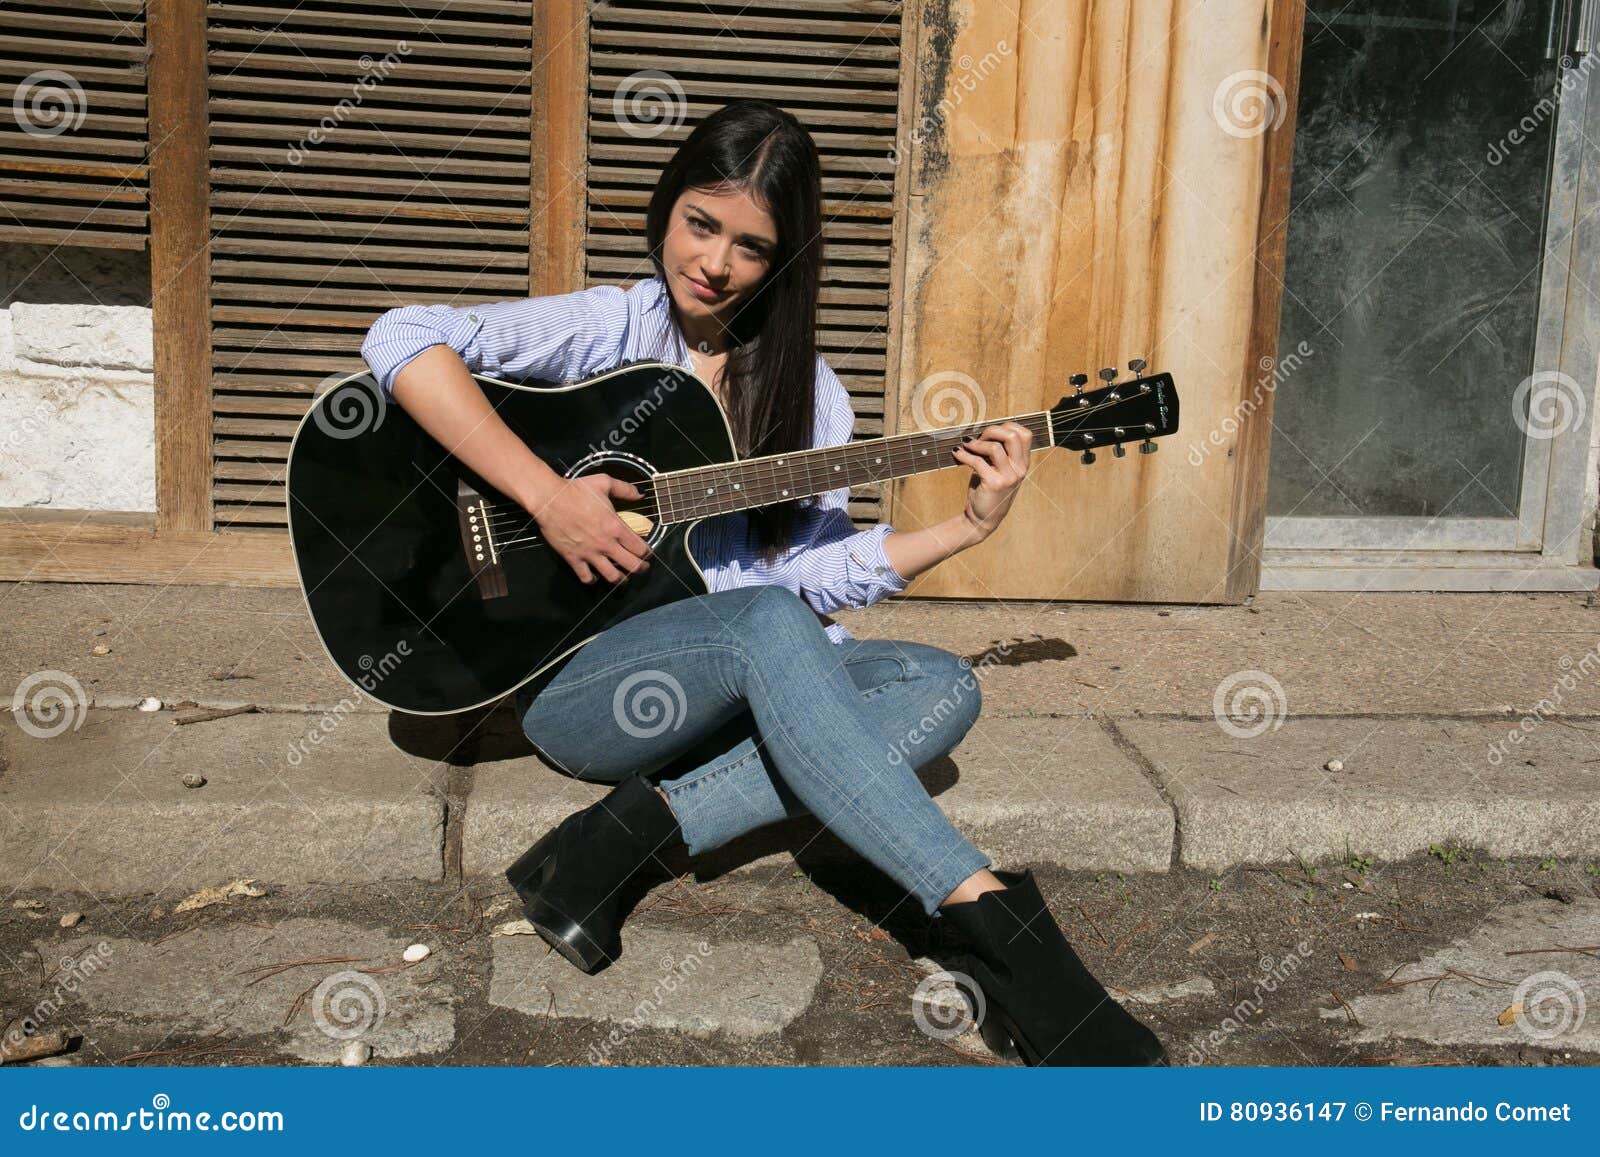 Premium Photo | Young man with a guitar on the background of a brick wall